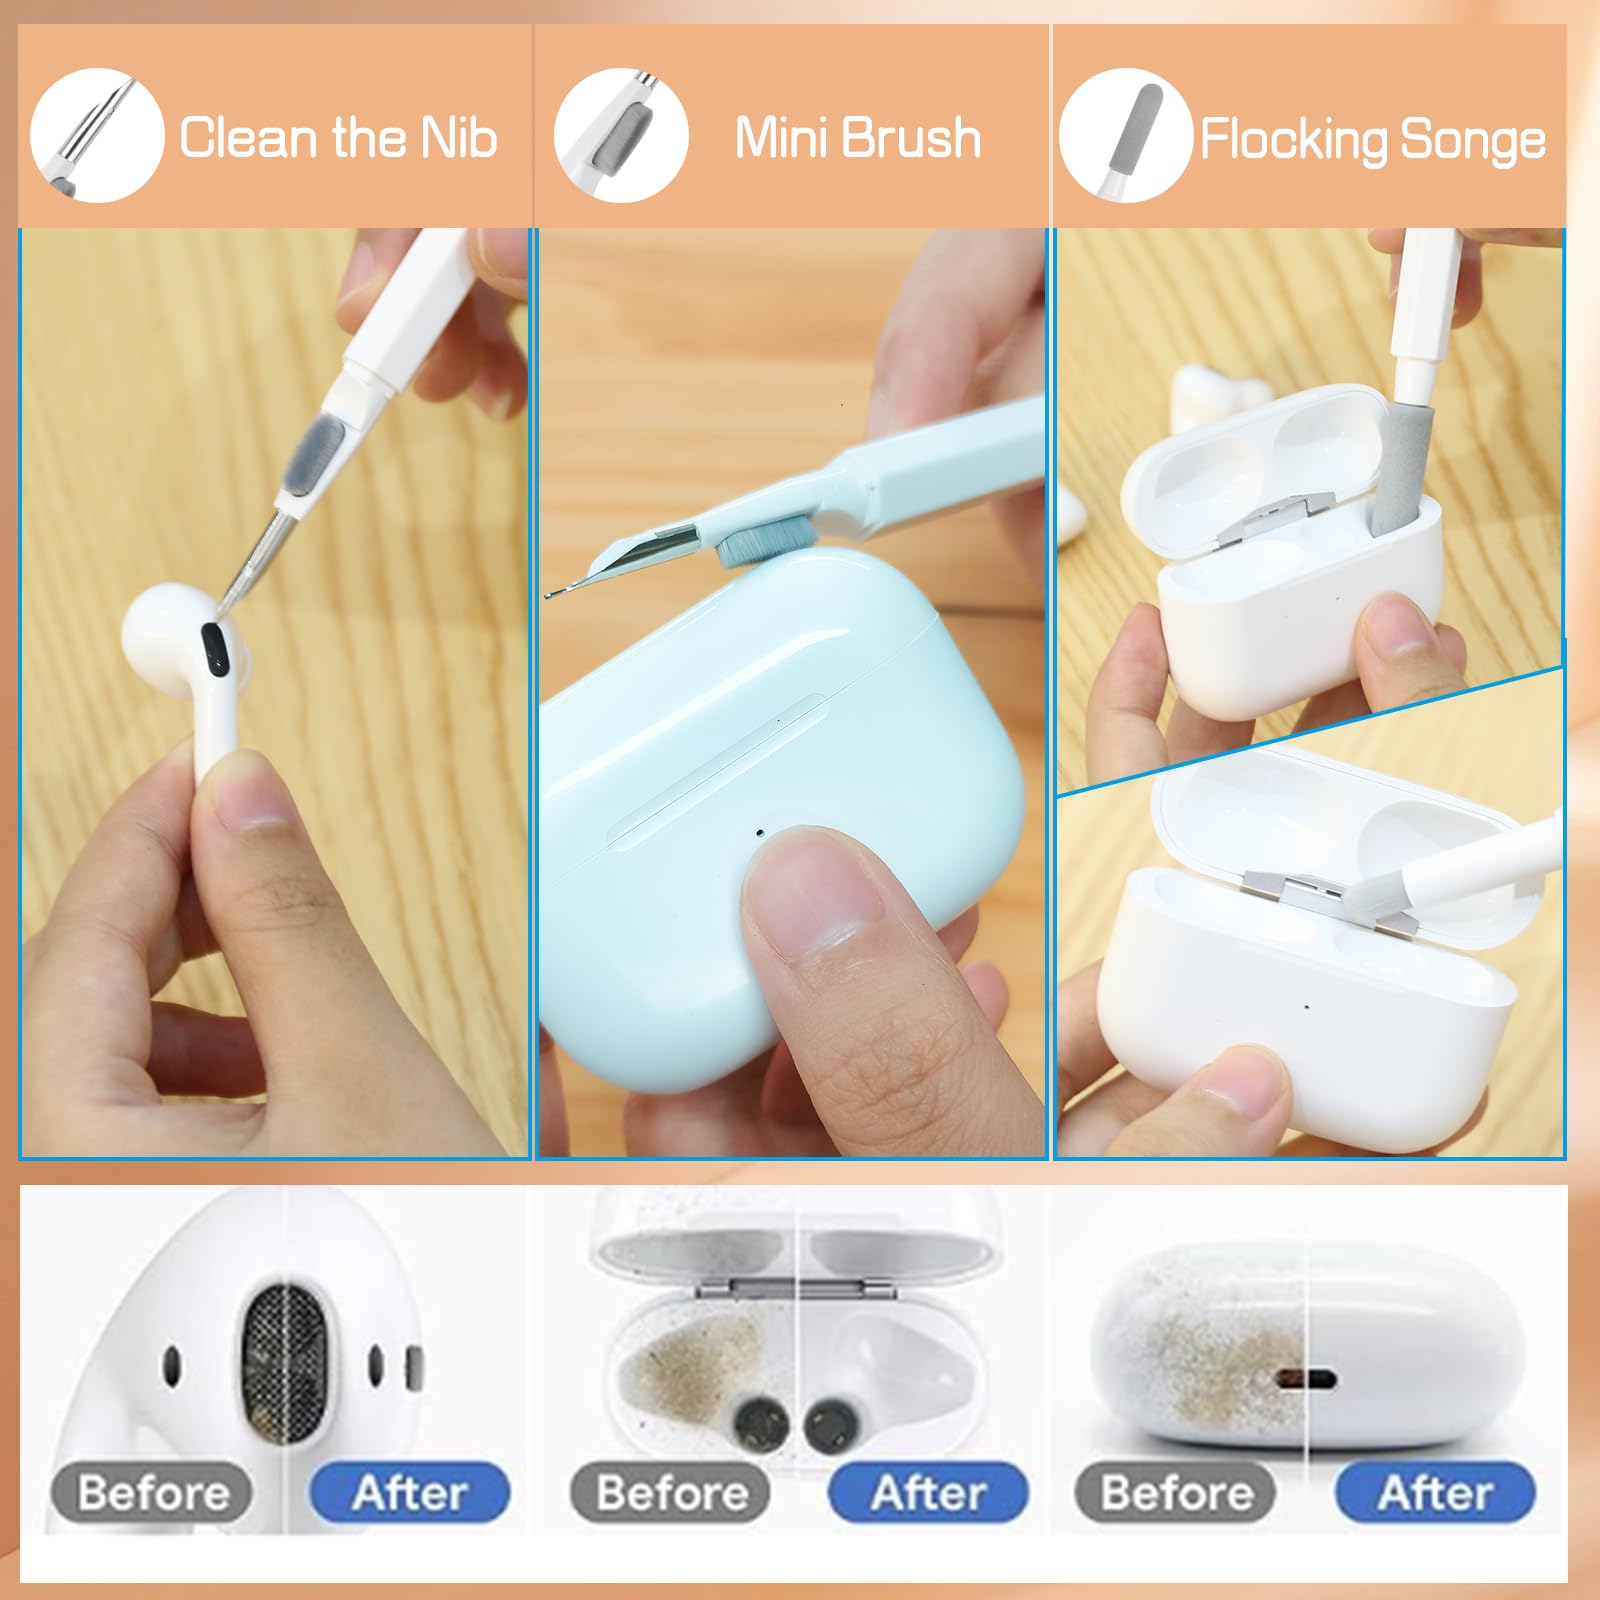 Cleaner Kit for Airpods, Earbuds Cleaning kit for Airpods Pro 1 2 3, Phone Cleaner kit with Brush for Bluetooth Earbuds Cleaner, Wireless Earphones,iPhone,Laptop, Camera (Pro White)